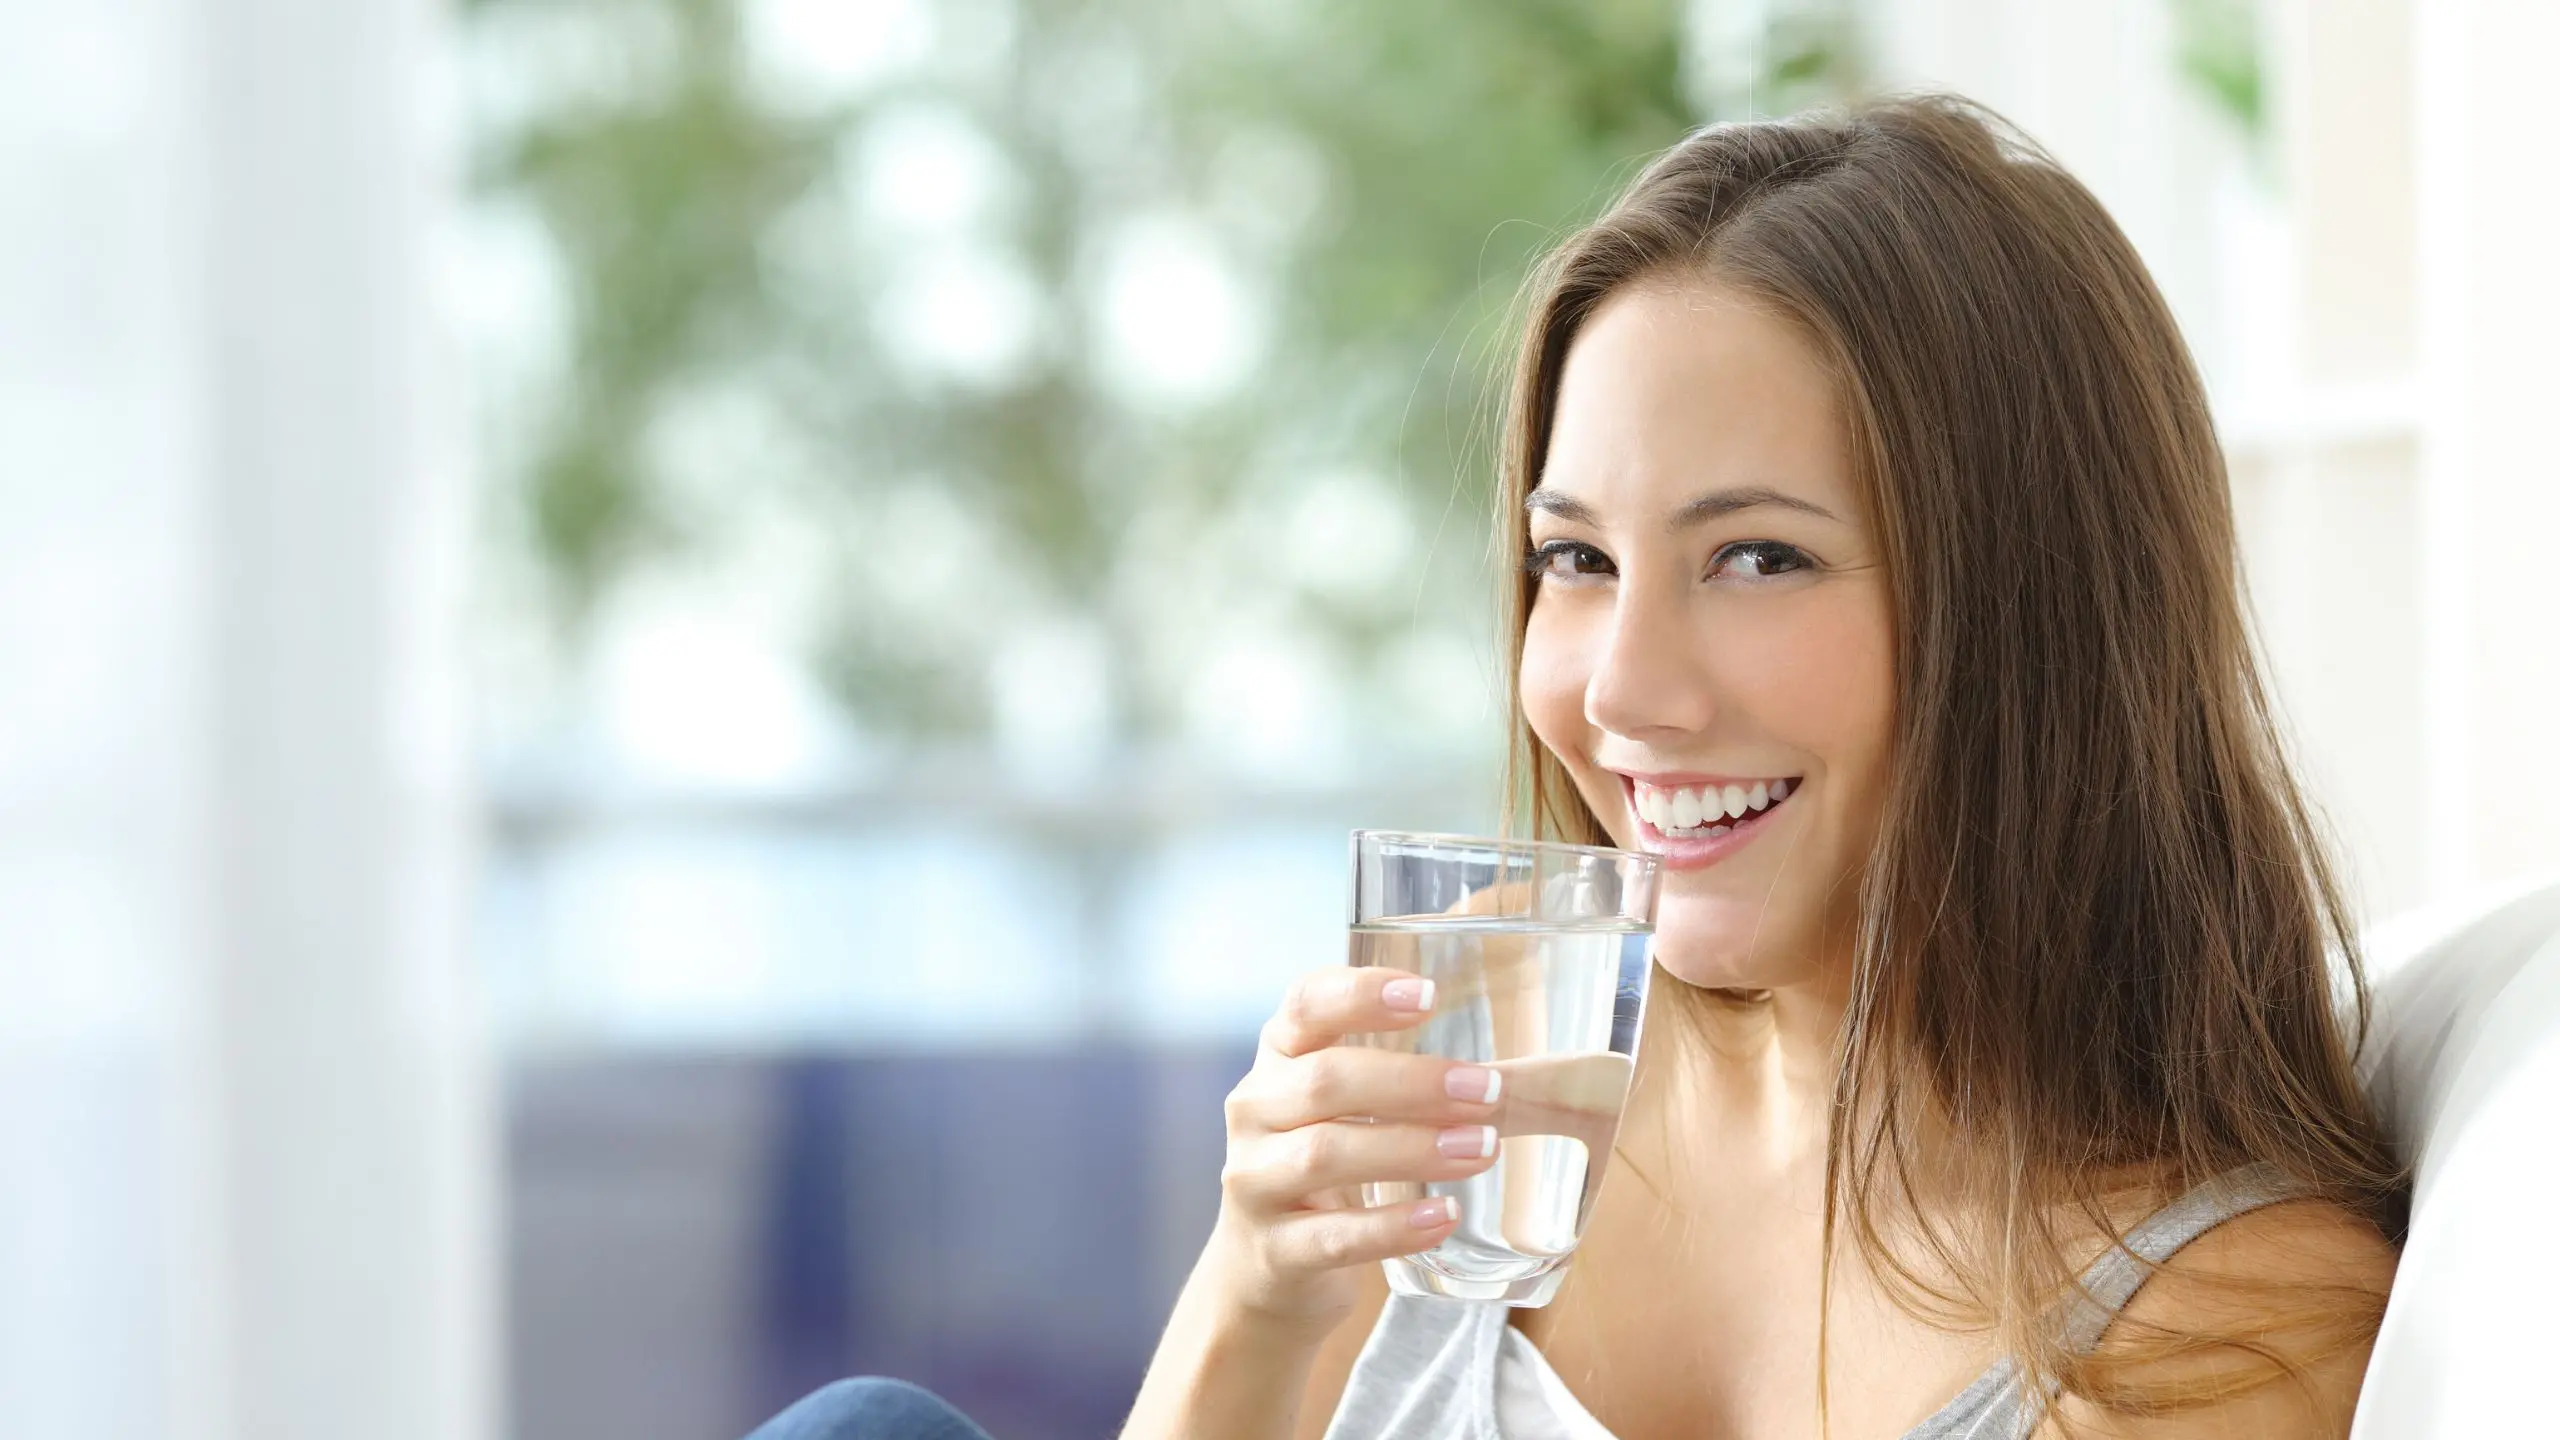 Warm Water Benefits Stay Healthy and Fit